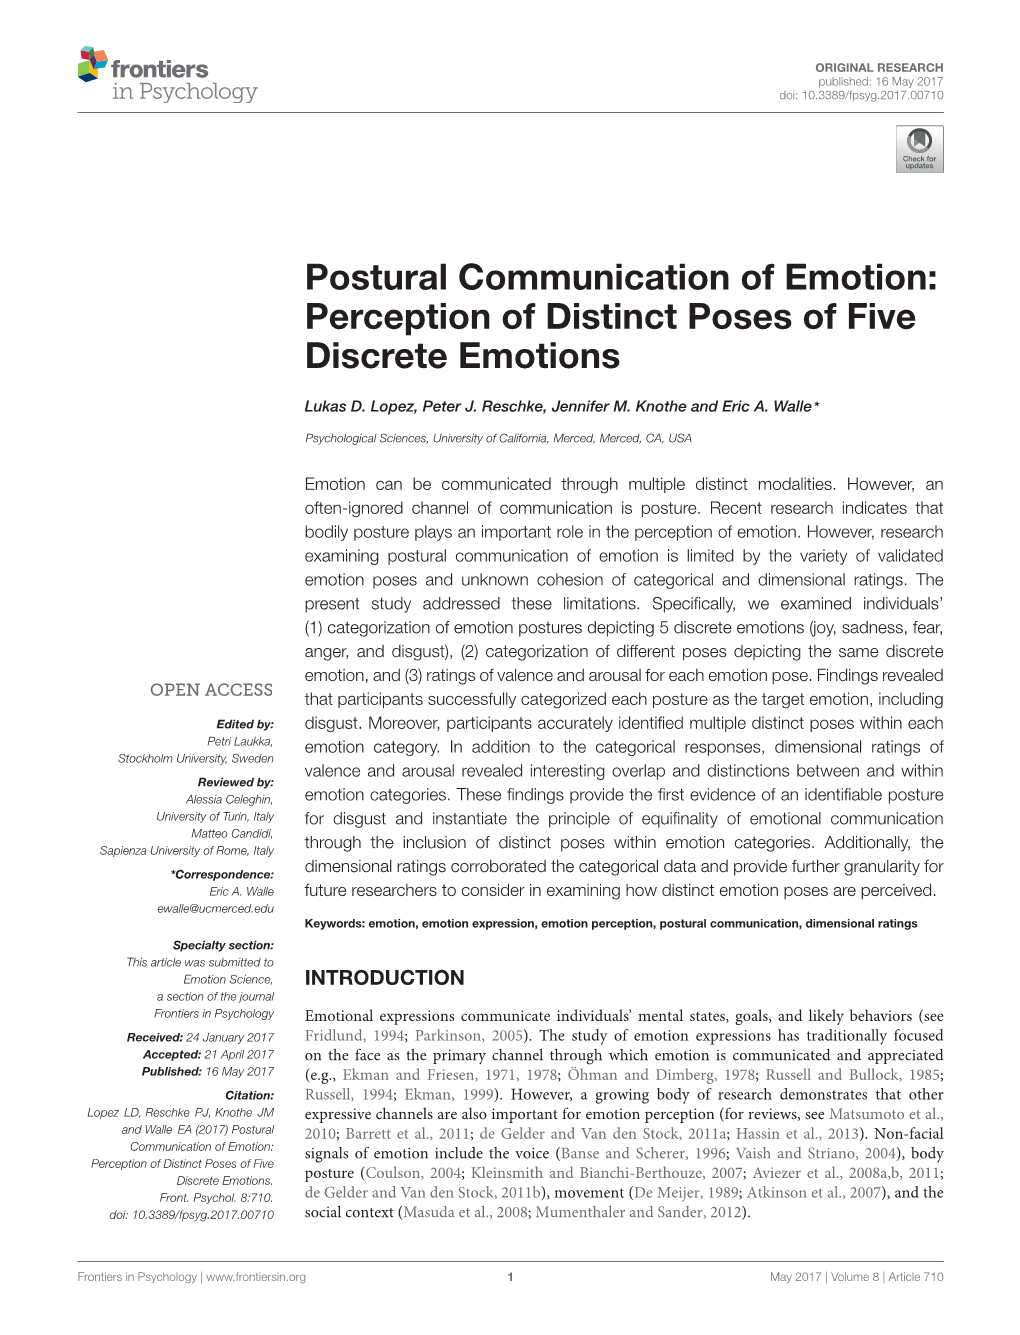 Postural Communication of Emotion: Perception of Distinct Poses of Five Discrete Emotions